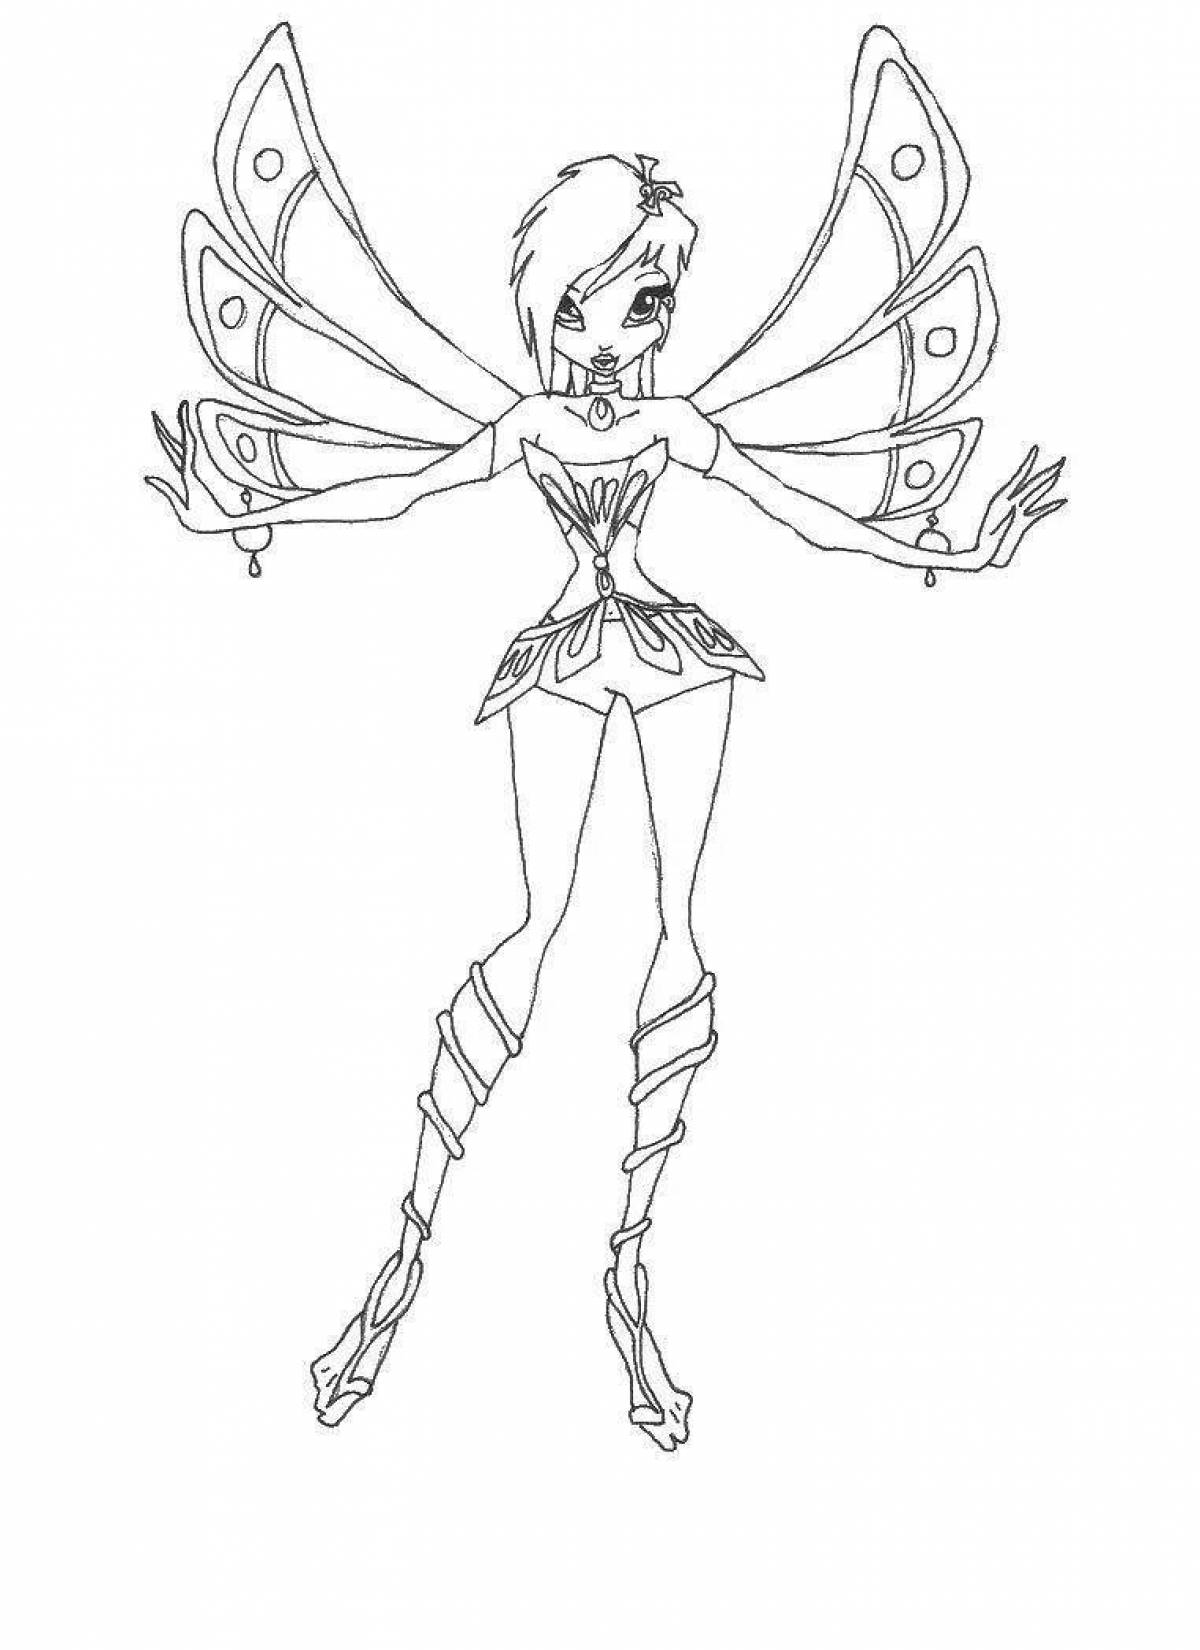 Tecna winx playful coloring page